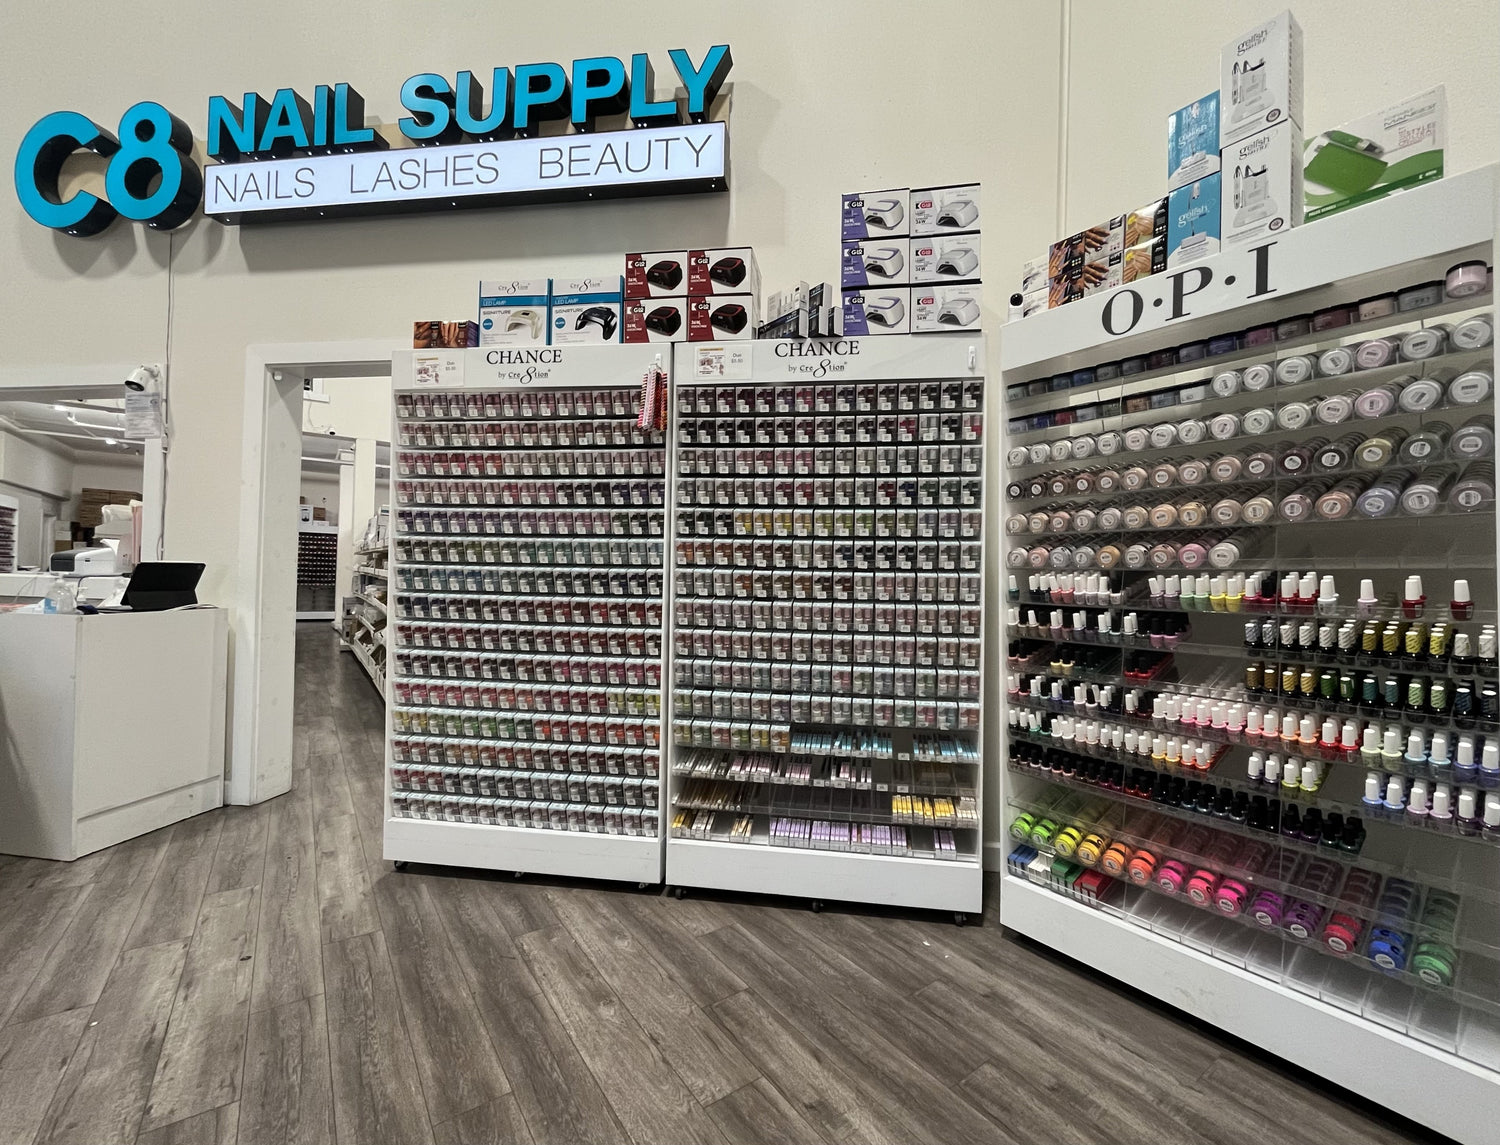 Storefront and lobby of C8 nail supply and a full shelf of products that we have to offer. On the right shelf there is an OPI shelf of products. Nail store, Nail Supplies, Nails, Nail supply store, Nail supply, OPI, Chance, Cre8tion, Acrylic Powder, Nail Lacquer, Nail Gel, Gel Polish, Nail Polish, nails, nail supply, nail supply store, nail store, nail supplies, c8 nail supply